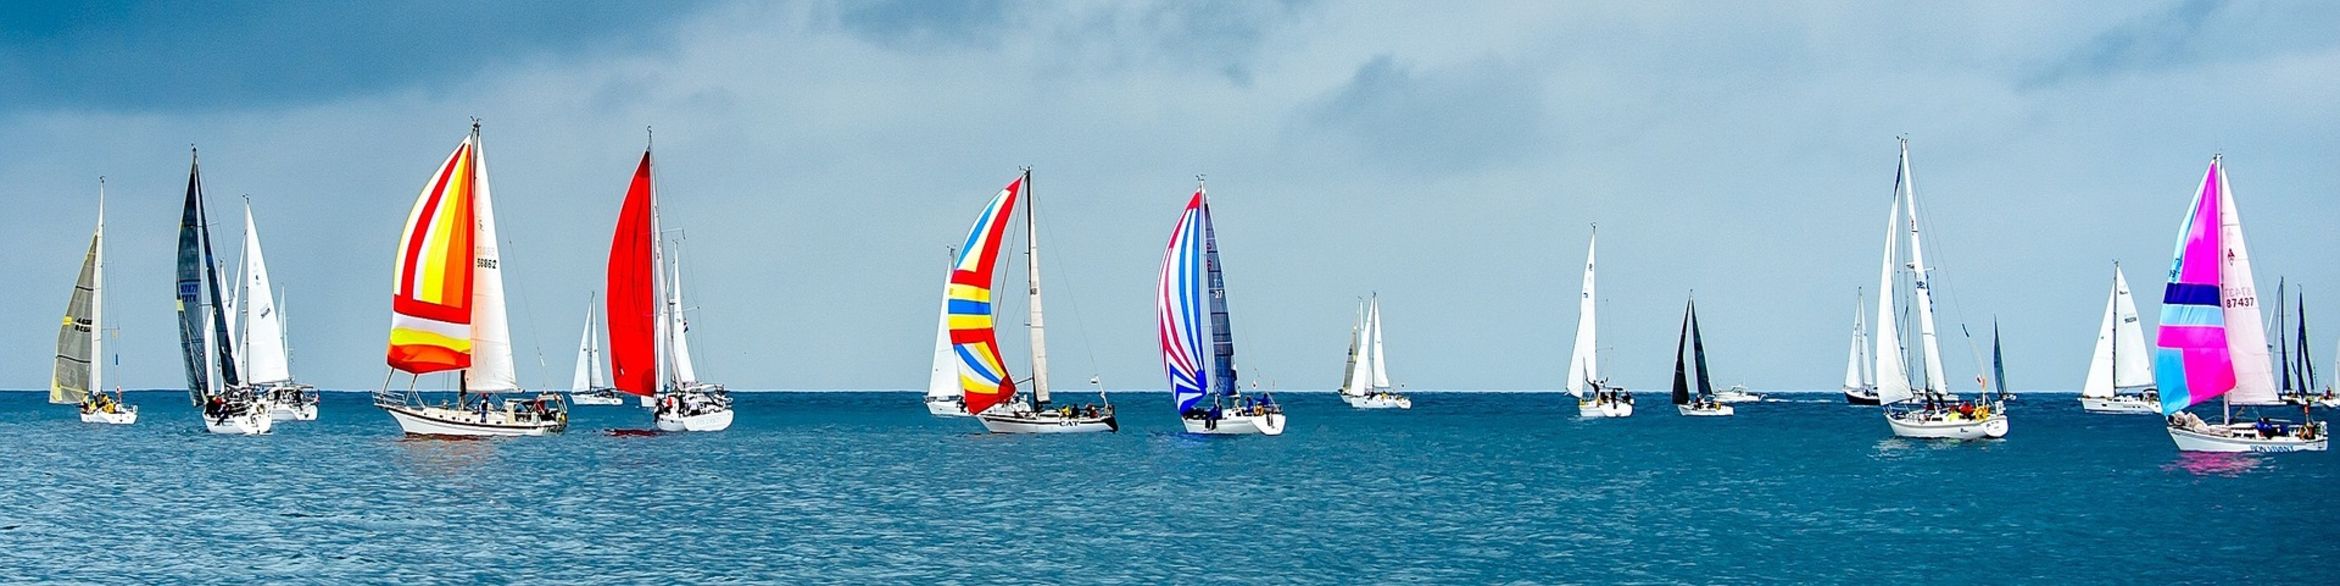 Clipper Round the World: 2nd Race Results Confirmed